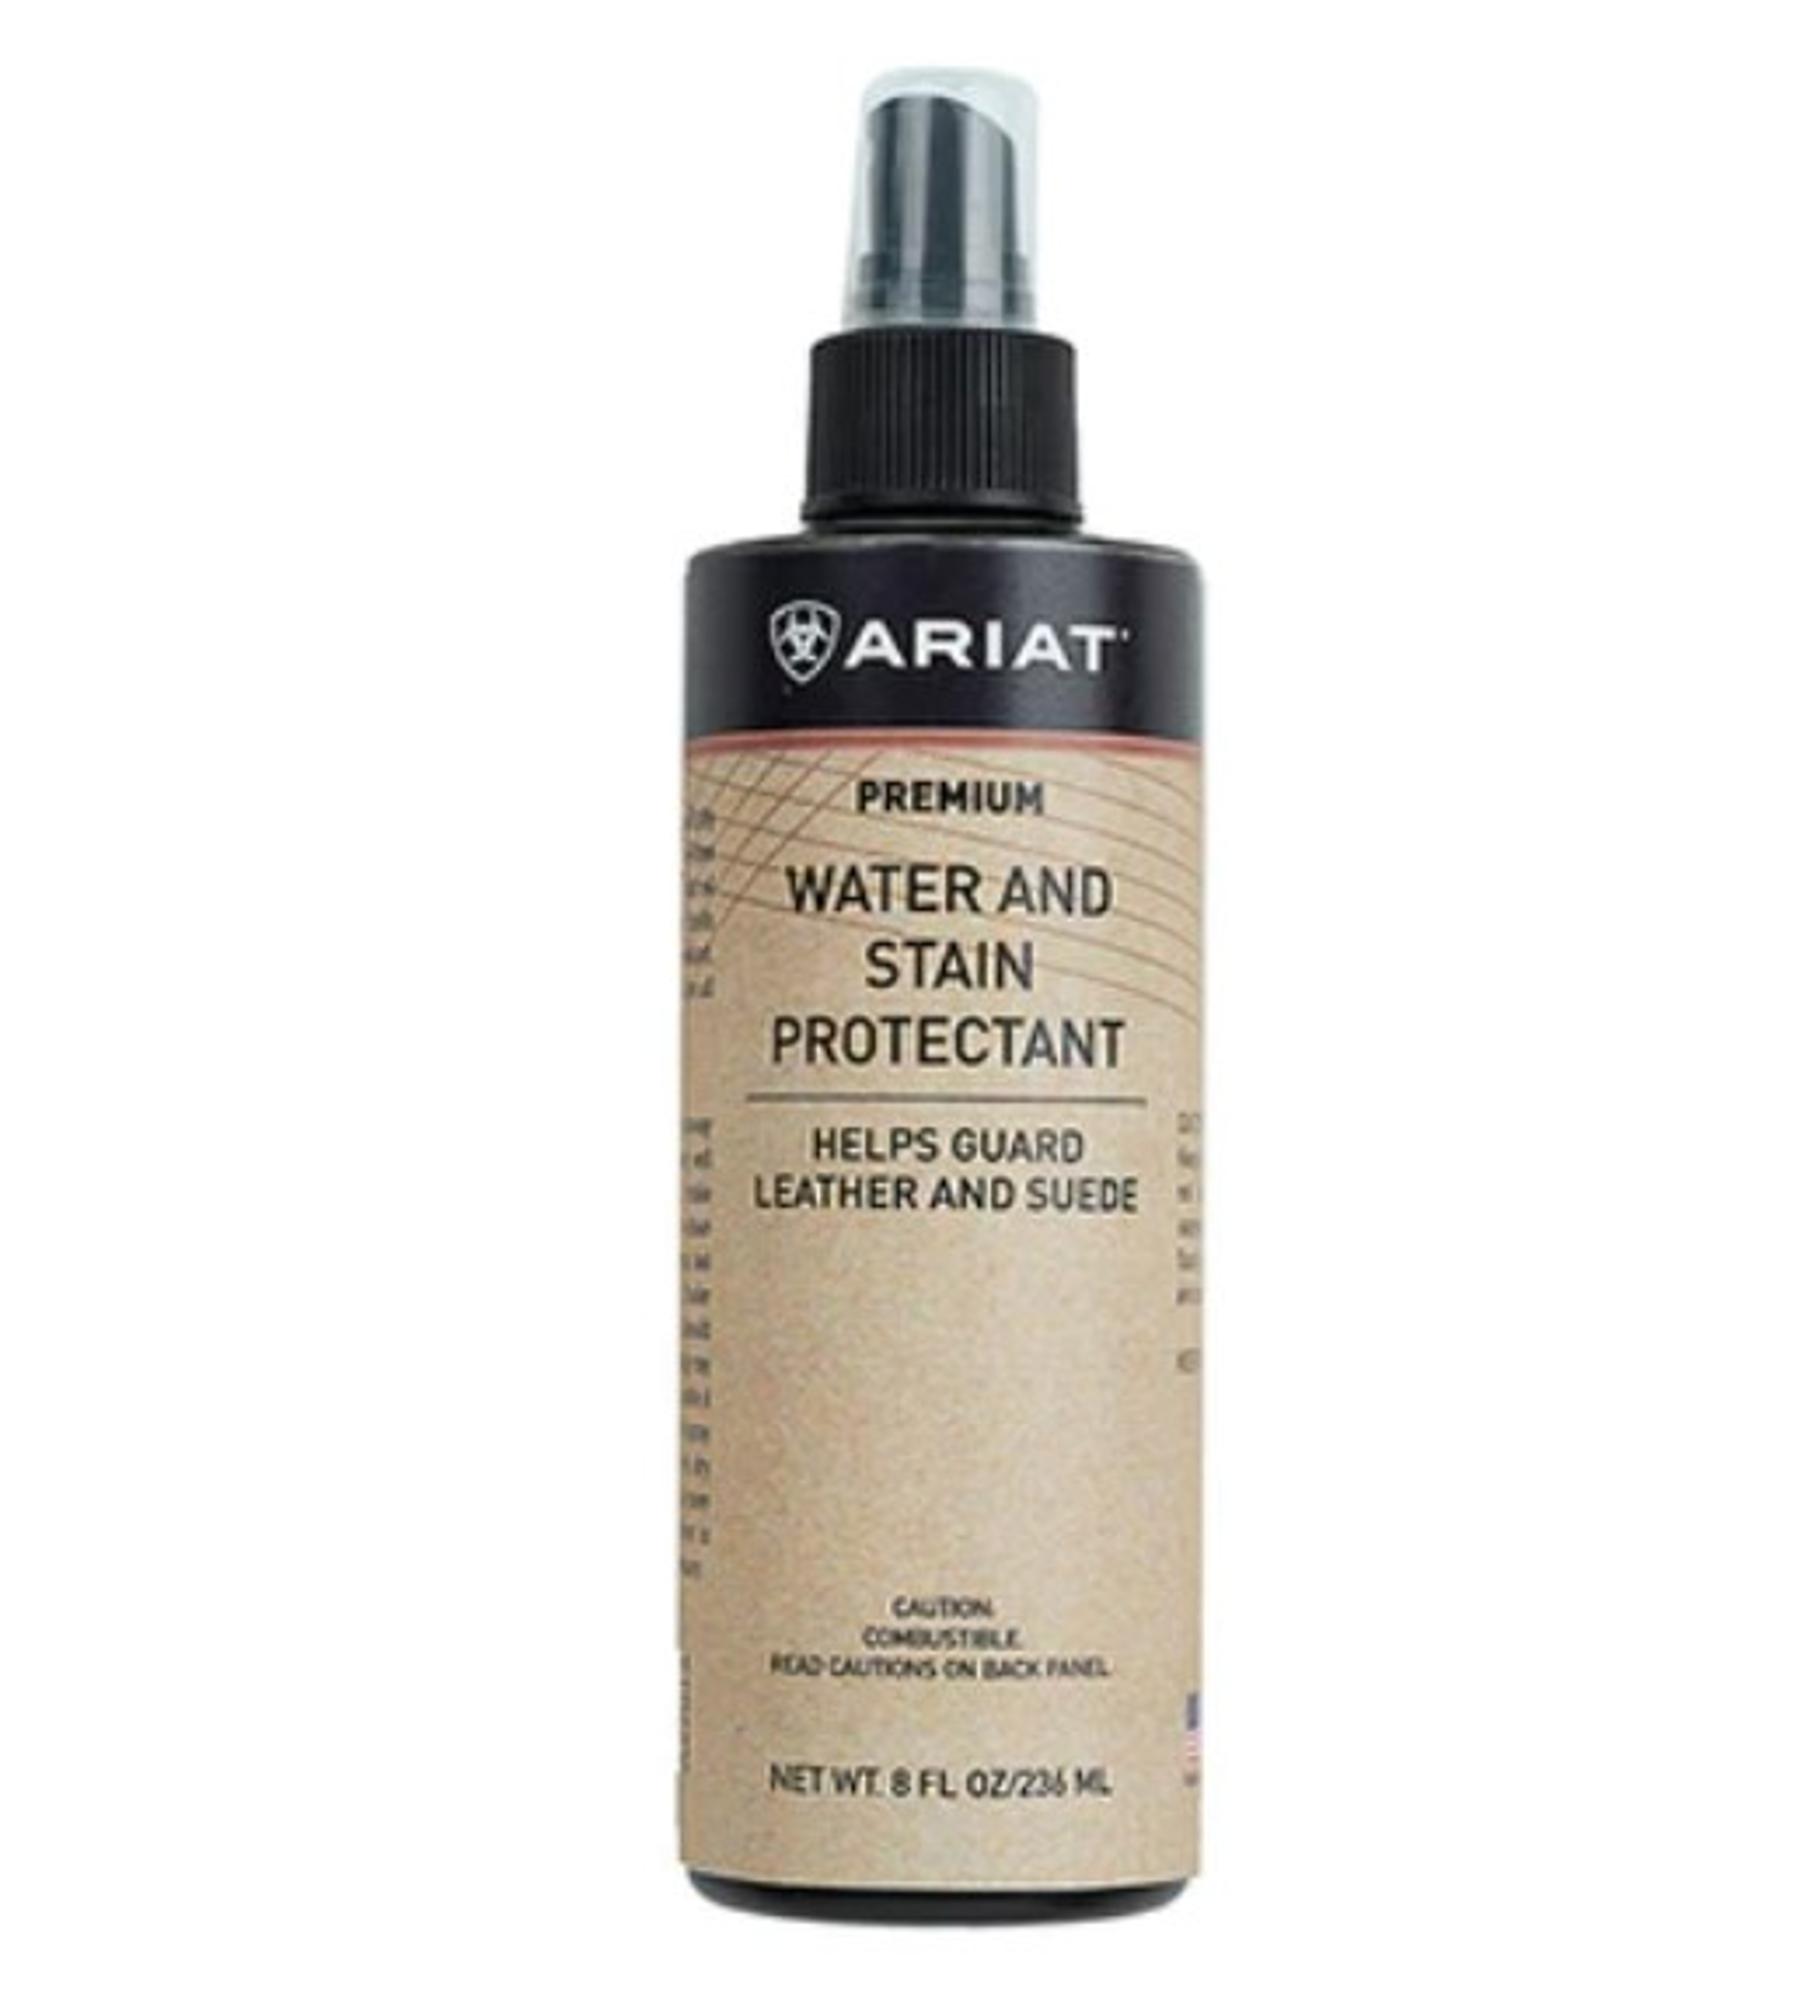 Water & Stain Protectant